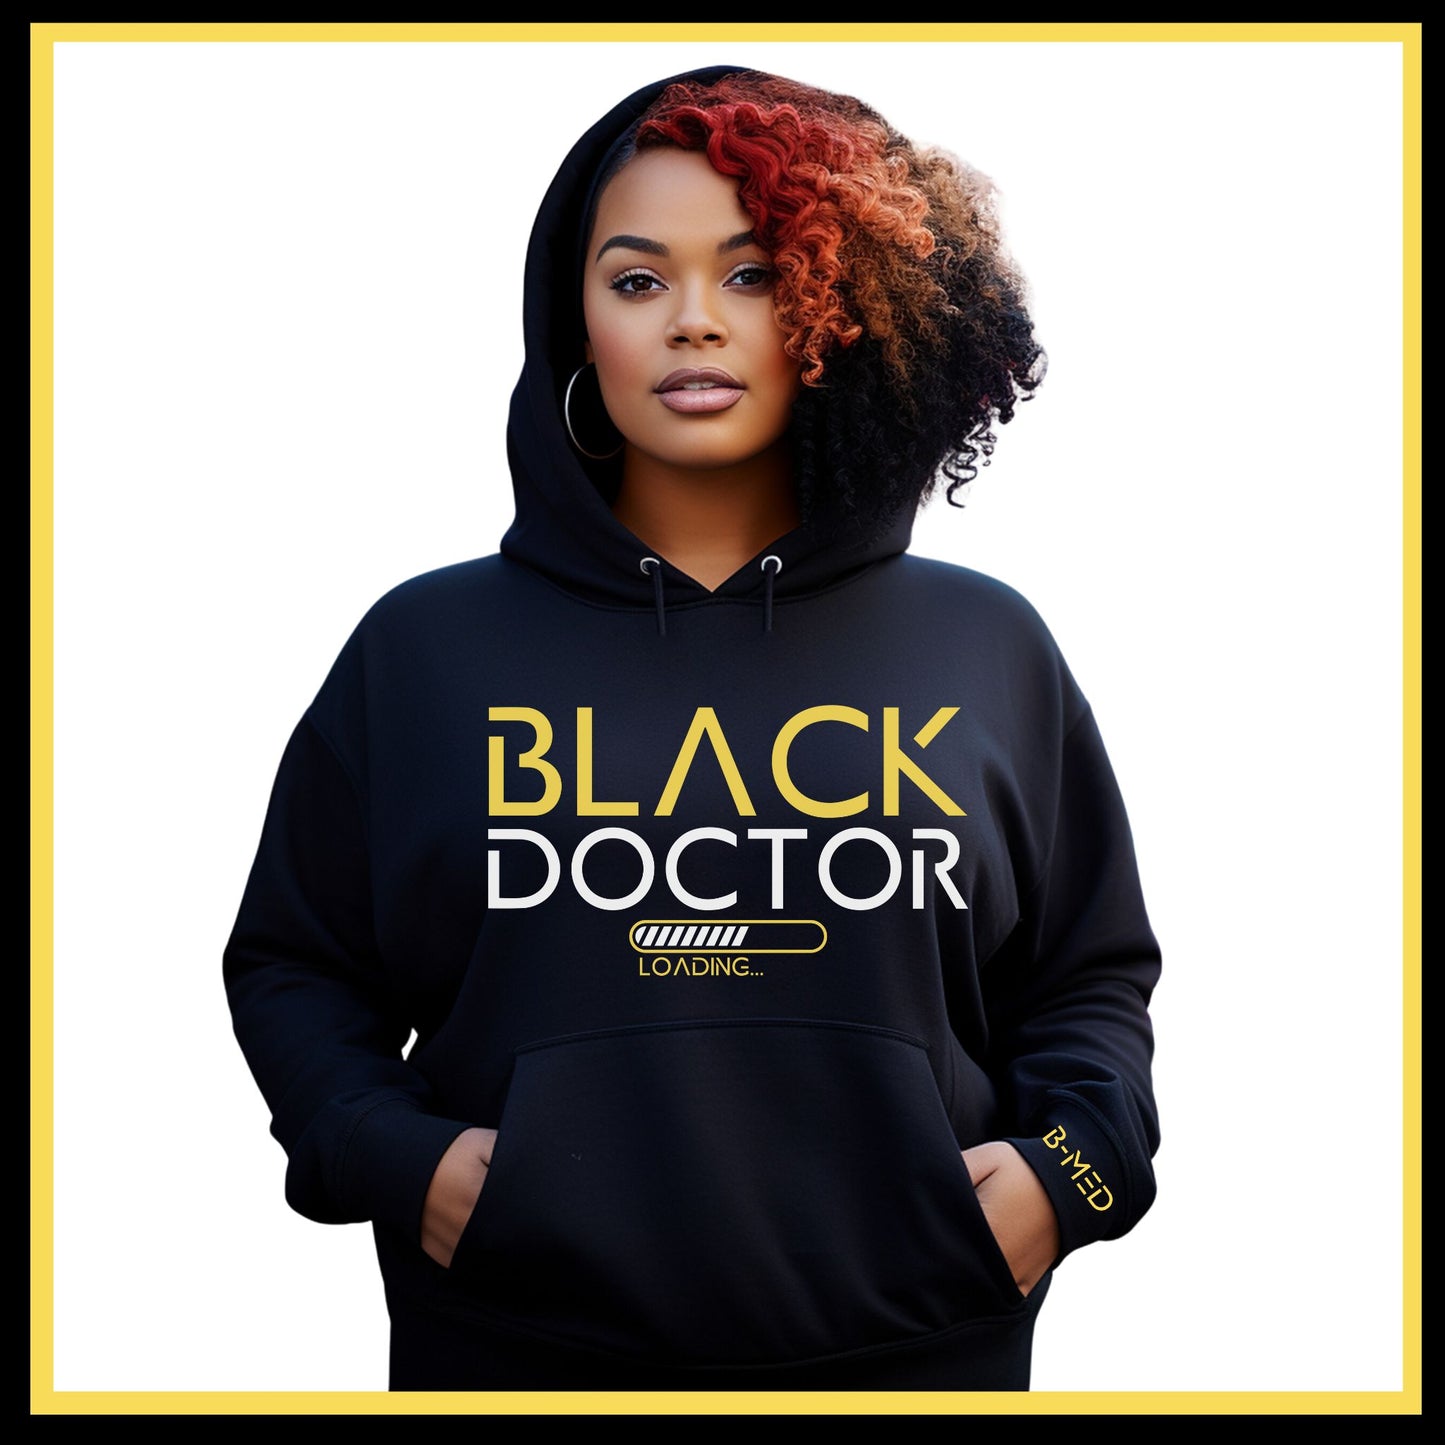 Black Hoodie featuring Black Doctor Loading design, a statement piece for aspiring doctors dedicated to increasing diversity in medicine.